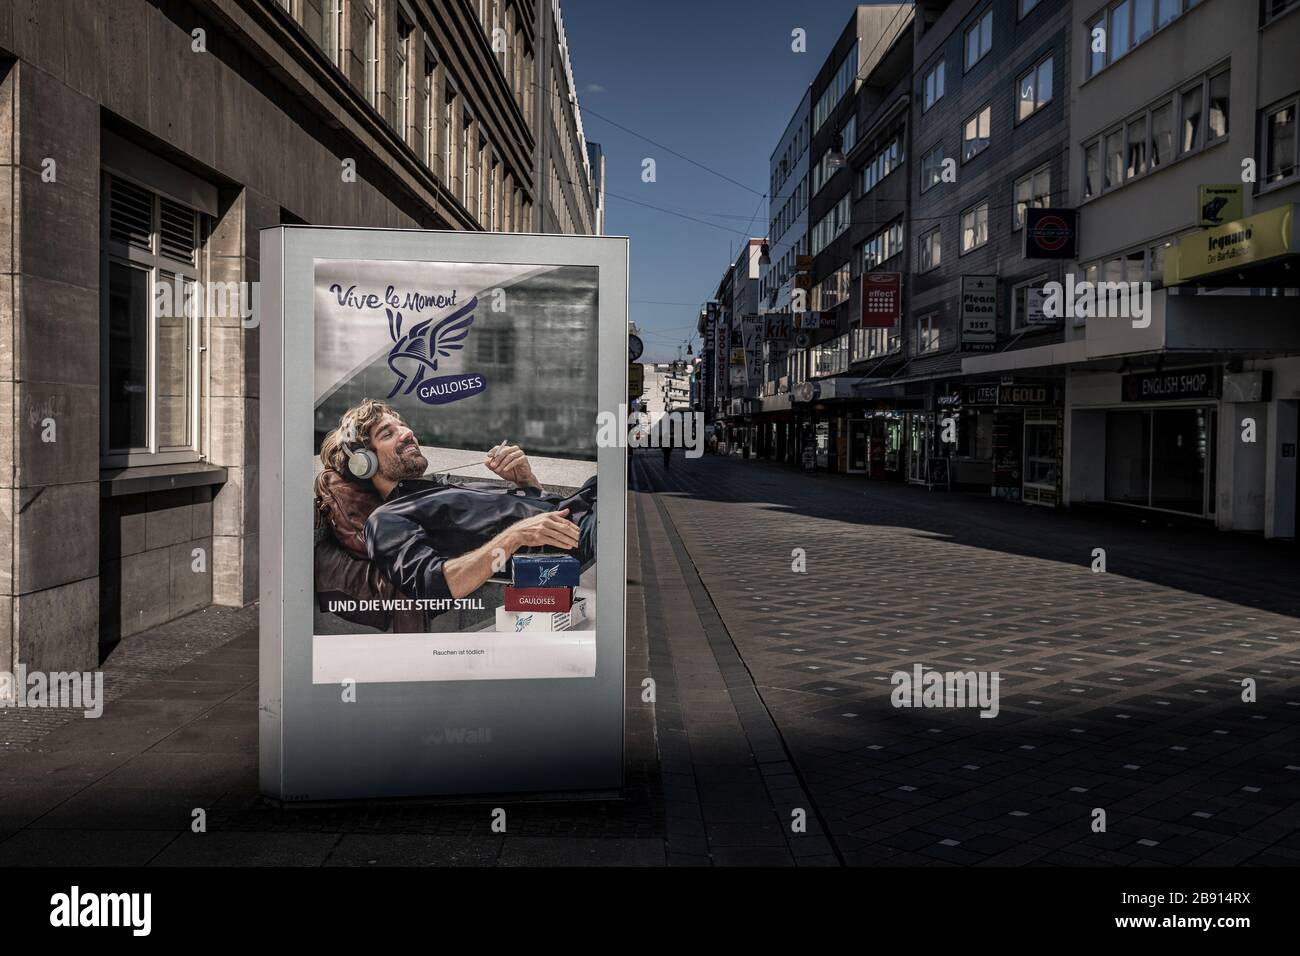 Advertising message in times of the Corona crisis. Dortmund's city centre is almost deserted despite the weekly market. Only a few people still do their shopping, some with face masks, like here in the pedestrian zone Stock Photo